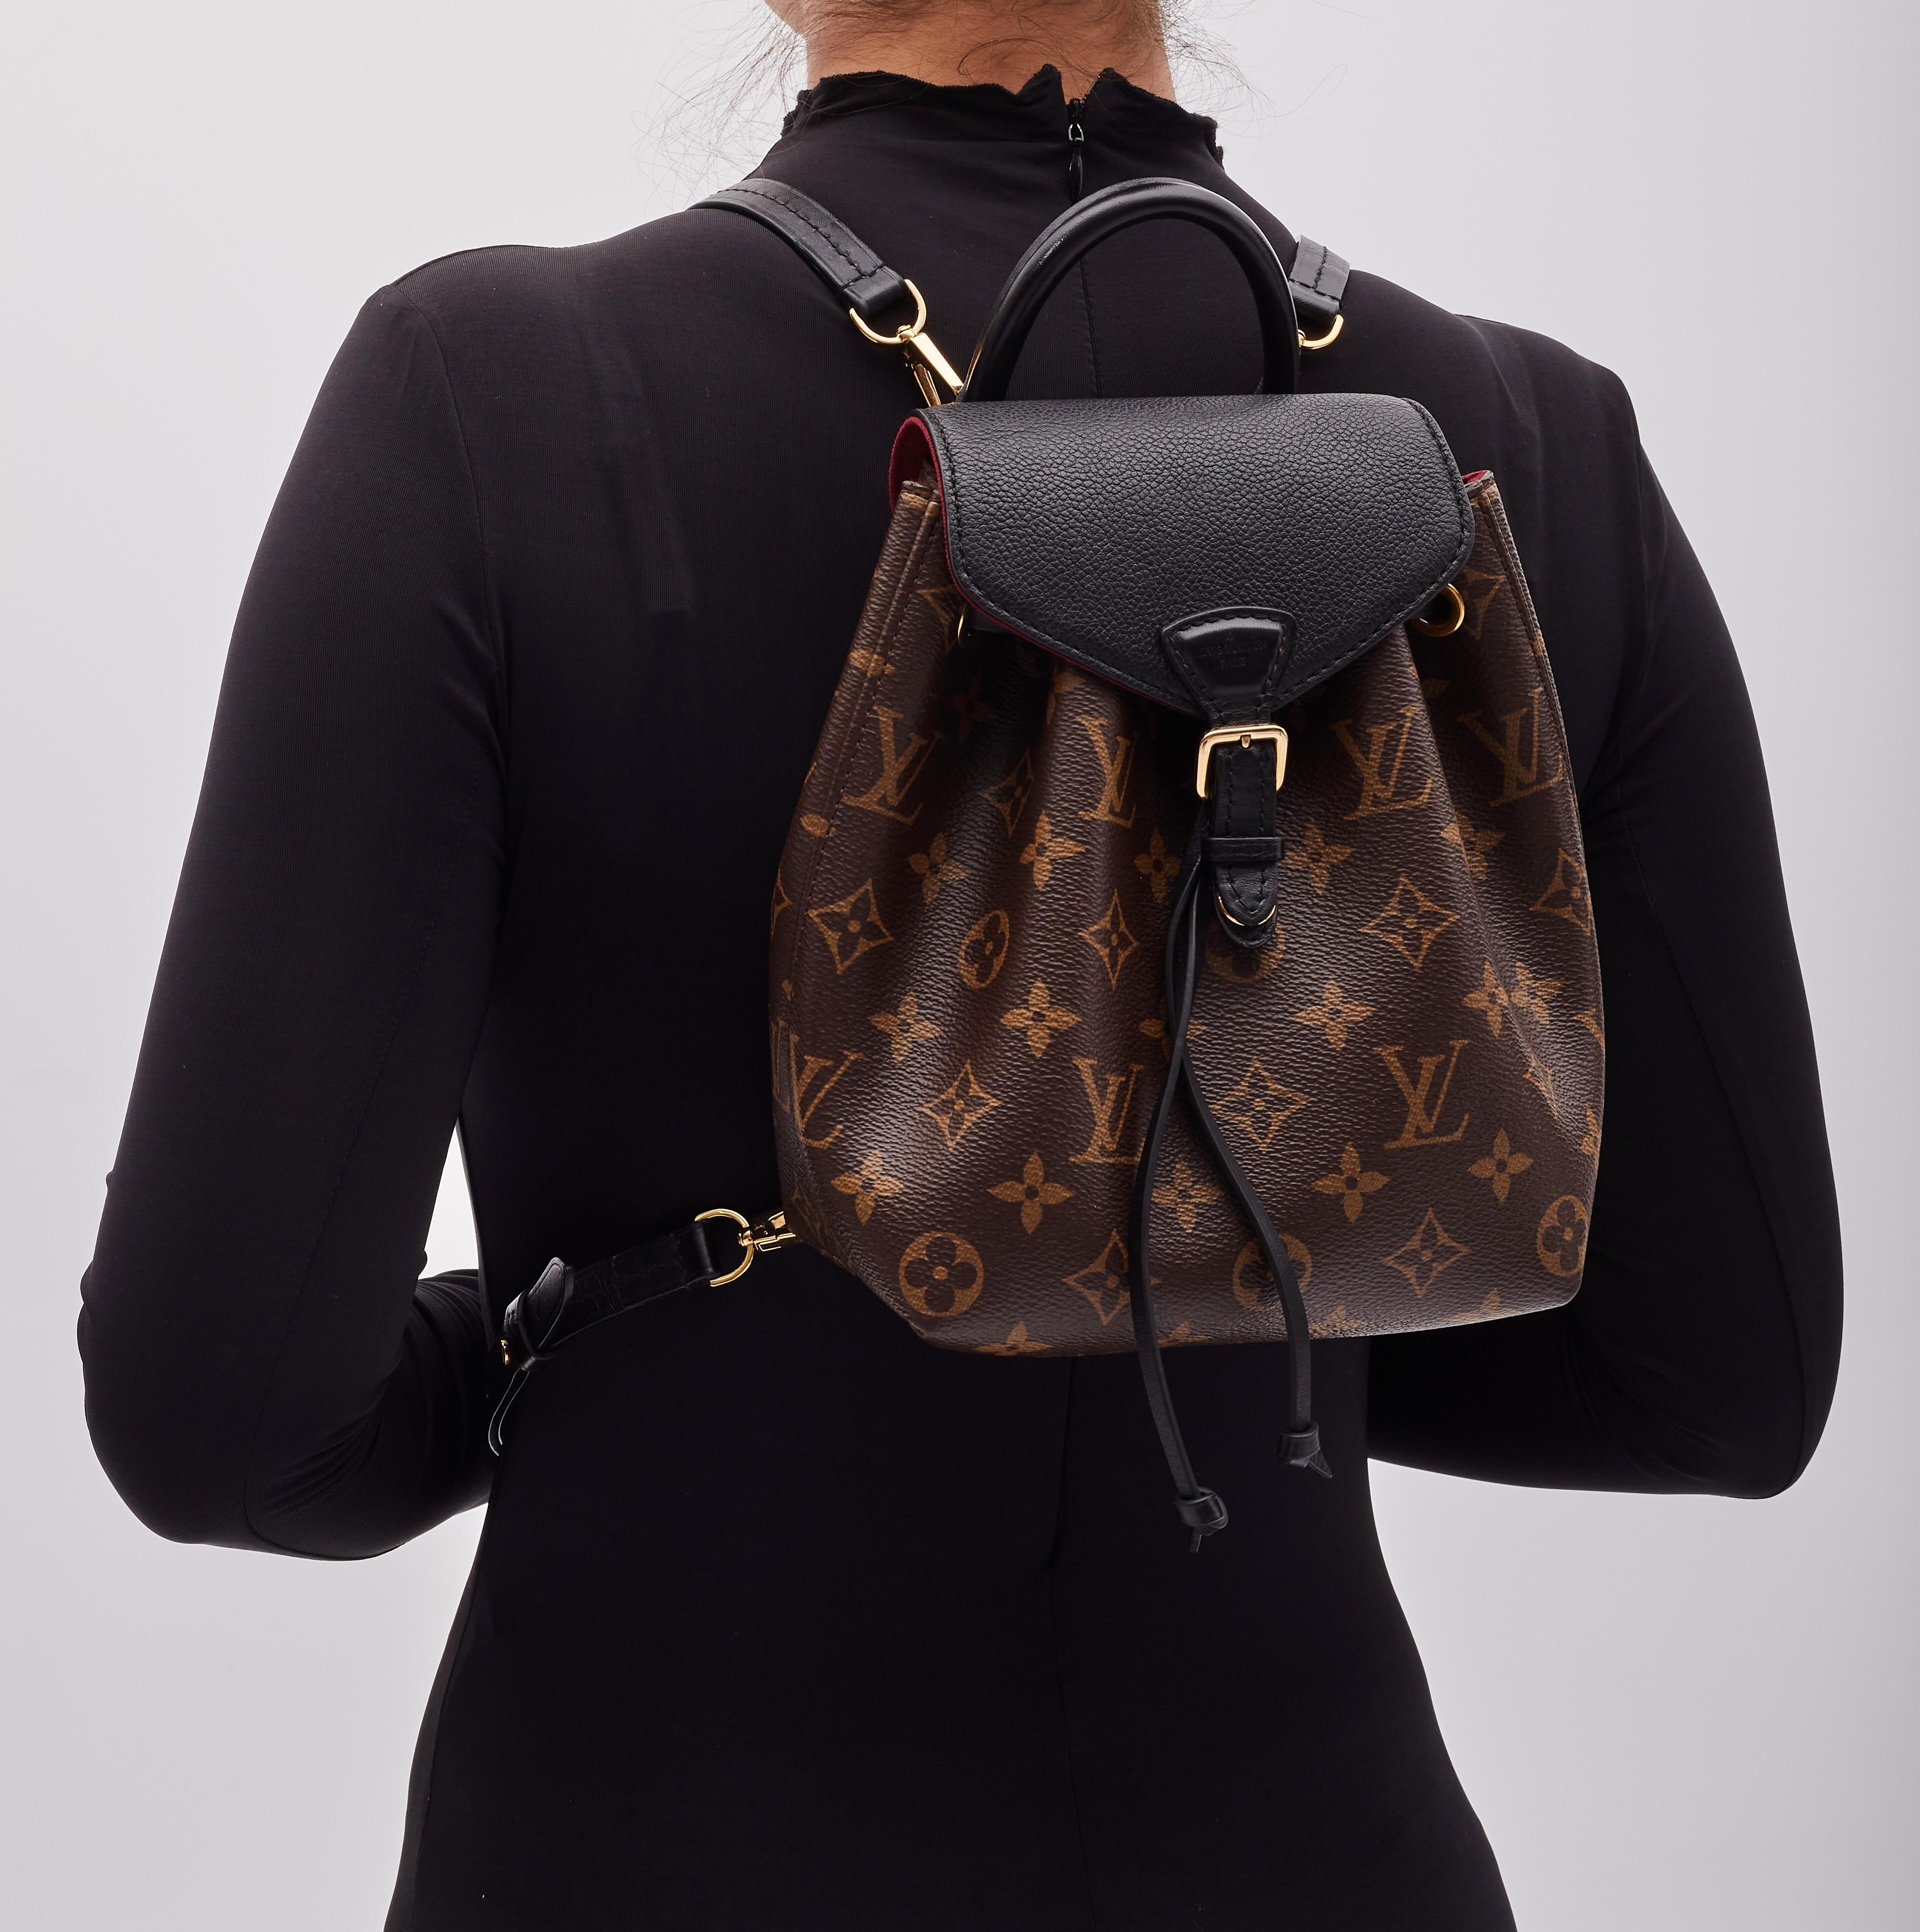 This stylish backpack is made from classic Louis Vuitton monogram with black leather details and finishes. The bag features adjustable straps, polished brass hardware, and opens with a belt buckle closure to a deep plum microfiber interior with a